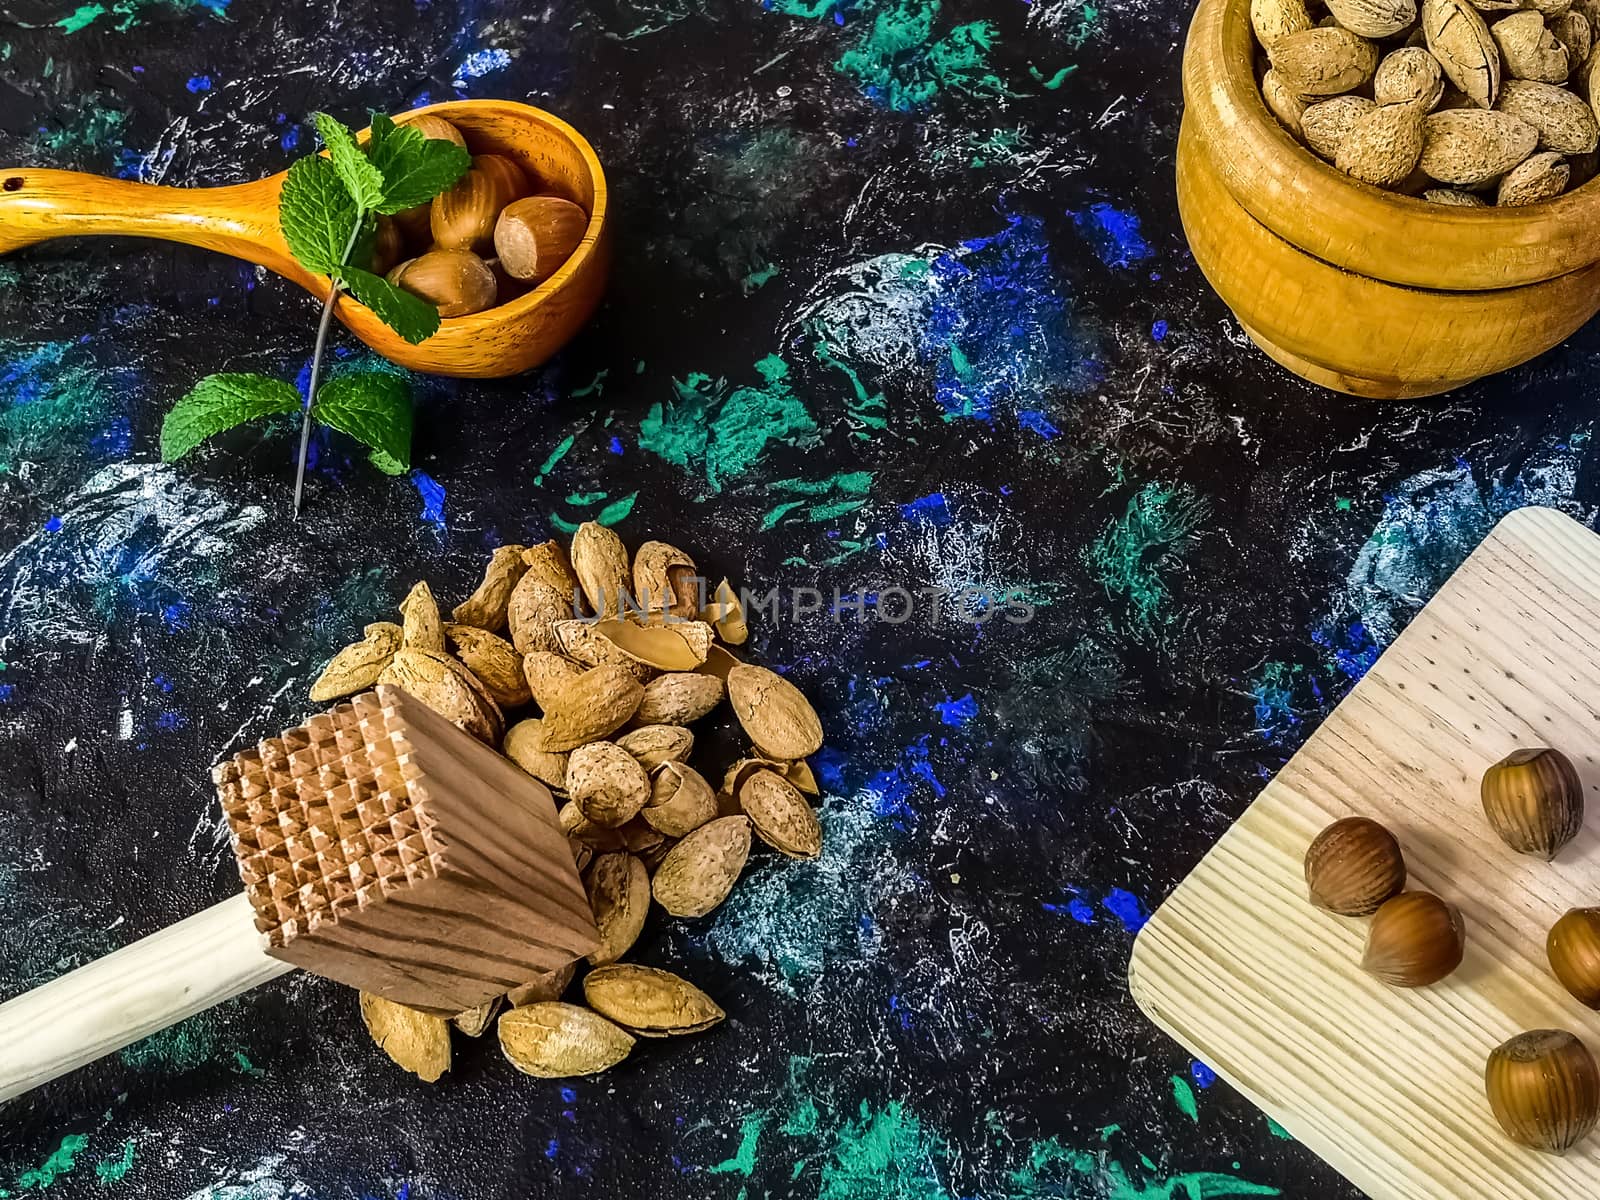 Walnuts and hazelnuts in composition on dark background by Barriolo82